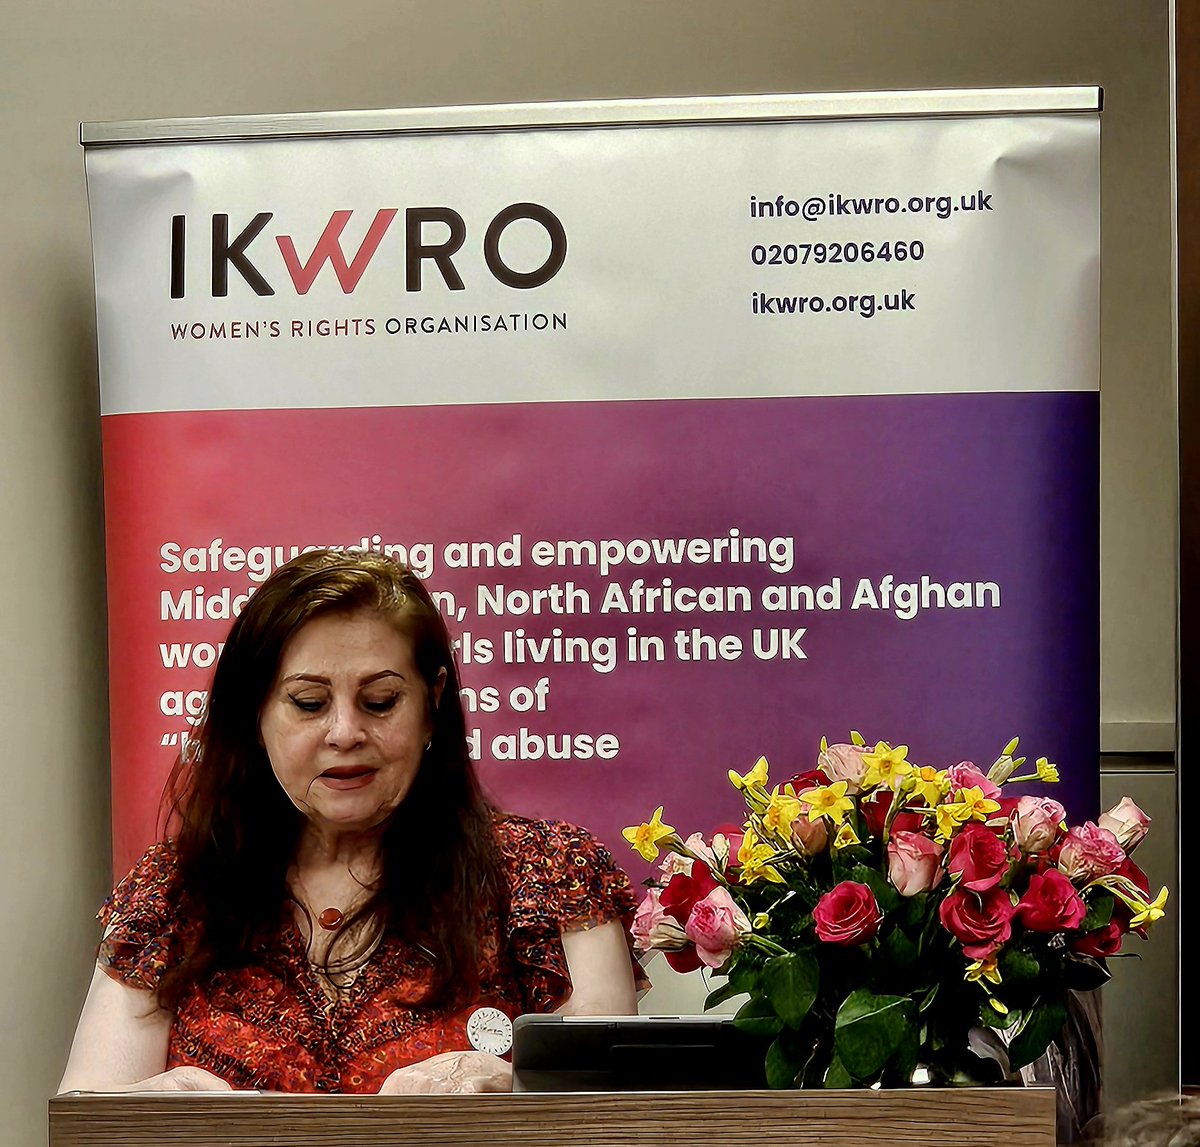 'Culture must never be used as an excuse for violence against Women and Girls' says @DianaNammi as she opens the True Honour Awards @IKWRO #TrueHonour #VAWG